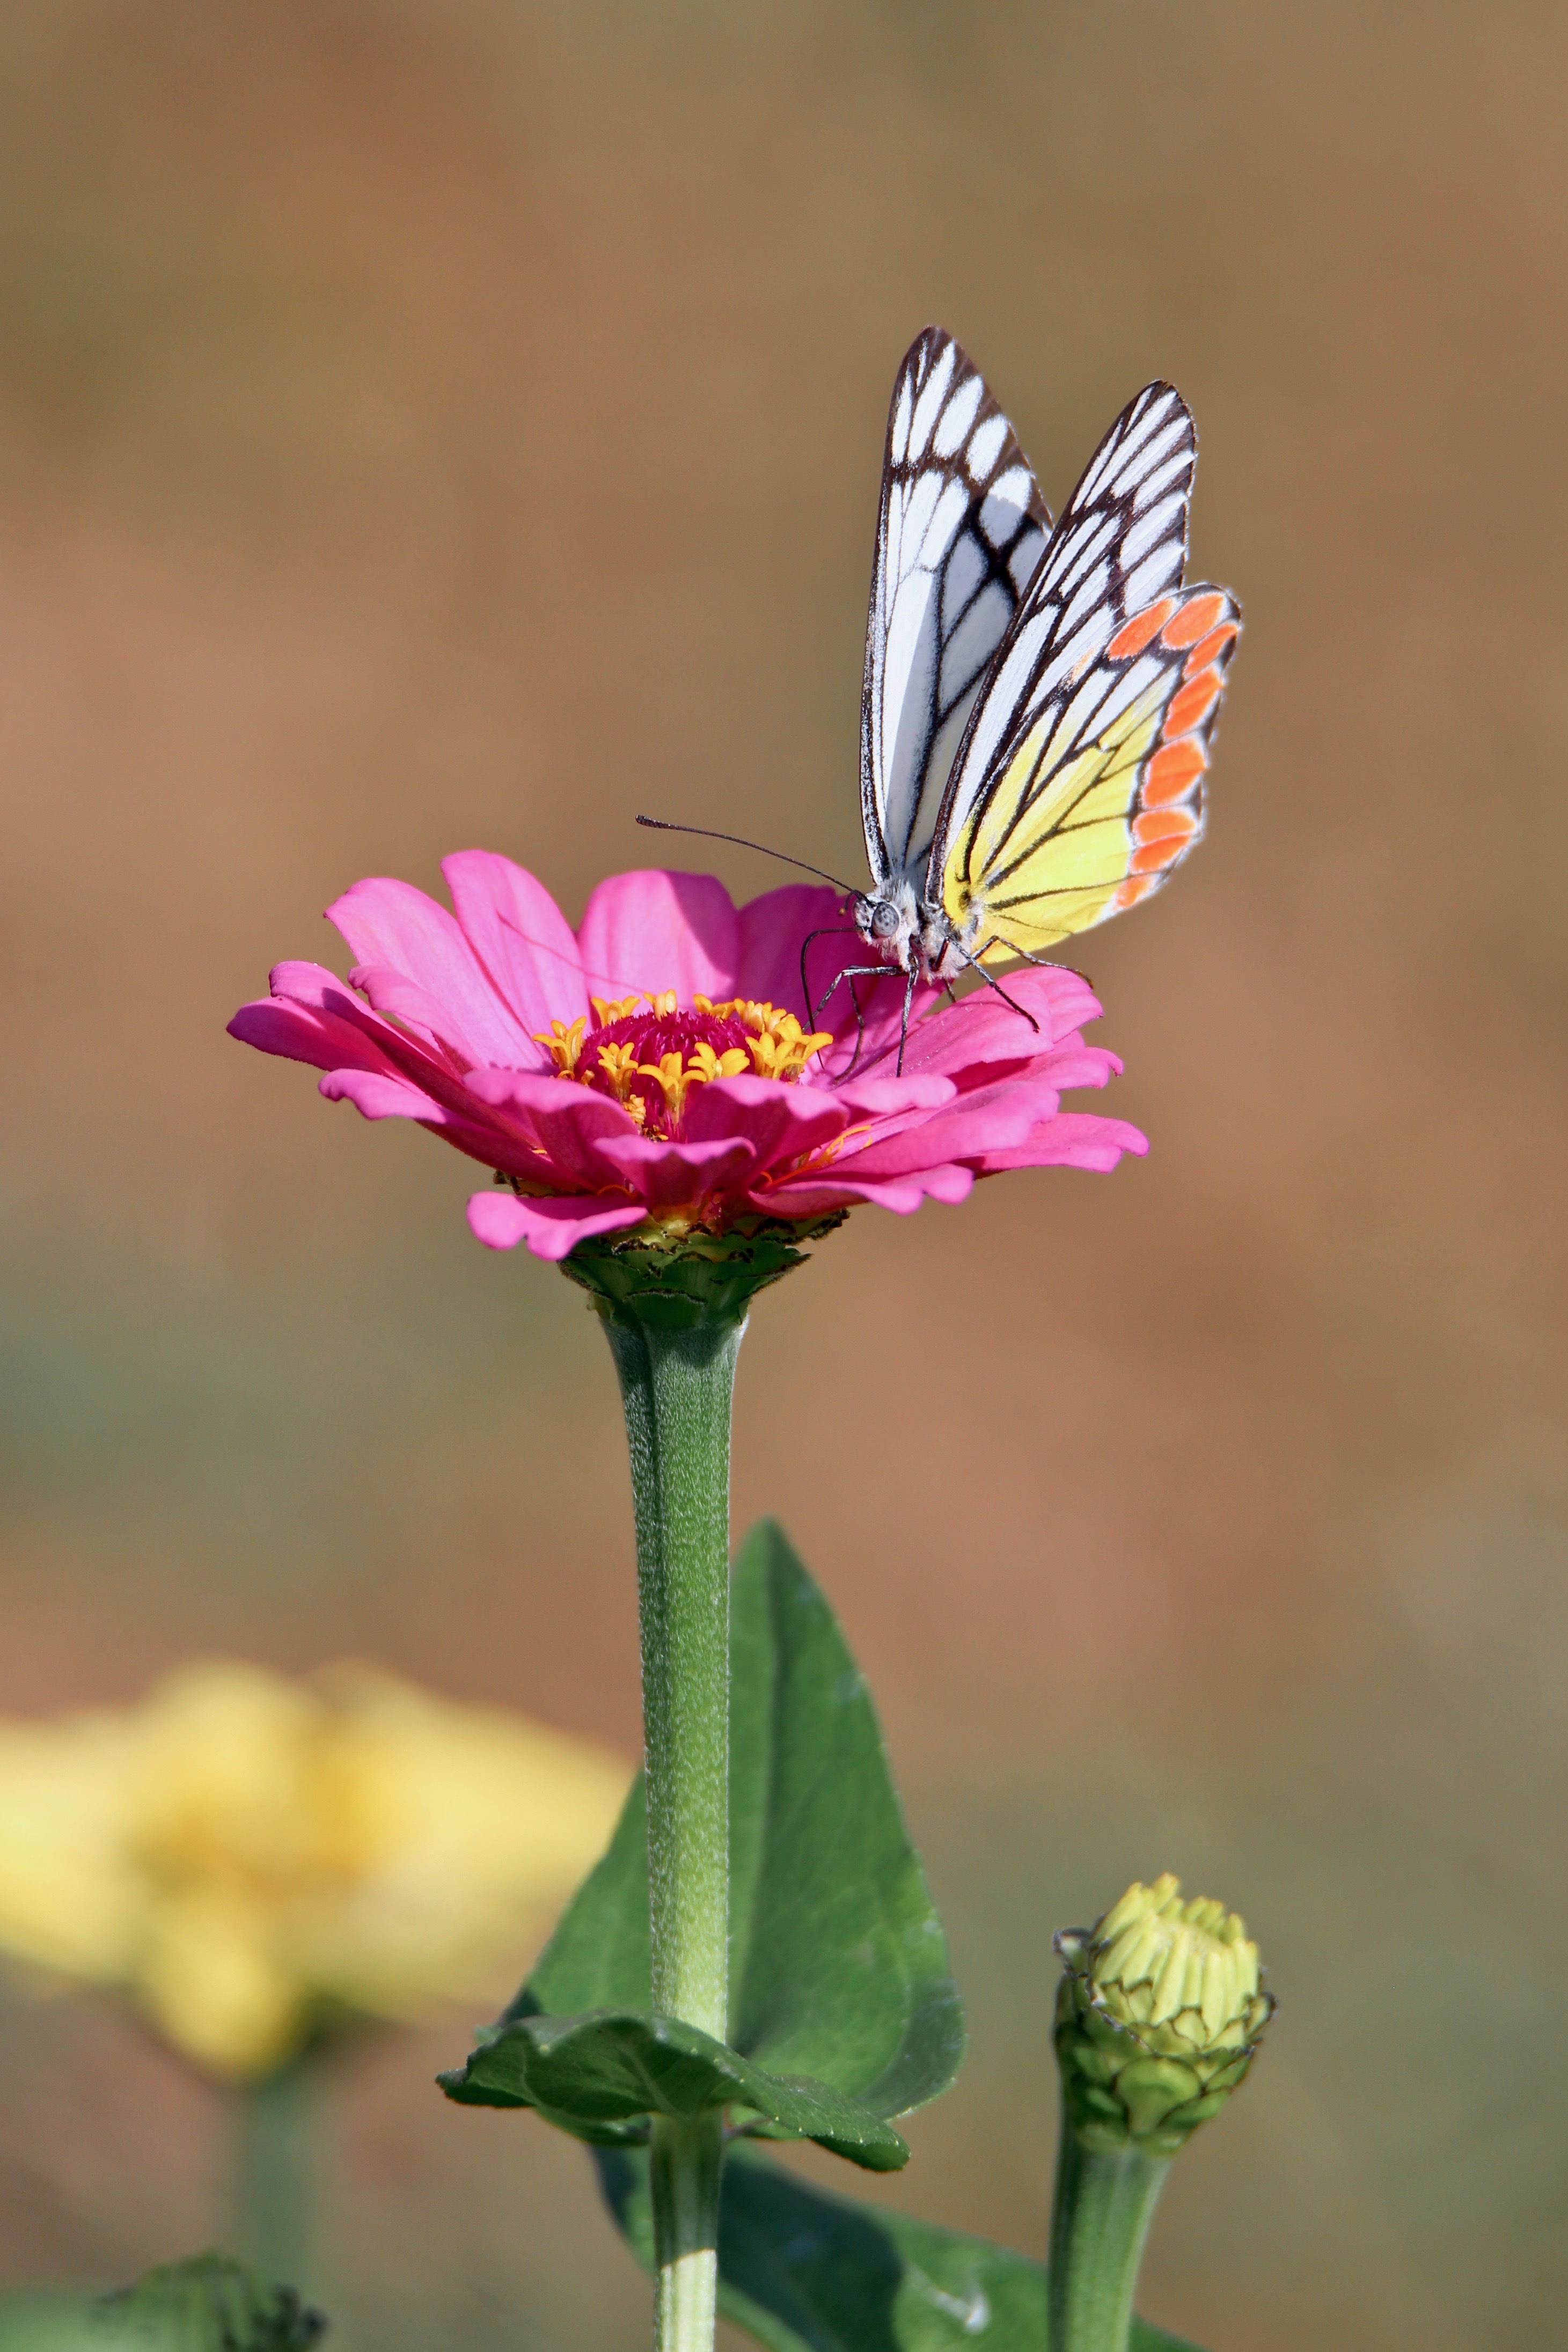 Common Jezebel Butterfly, butterflies of India, large high resolution images free